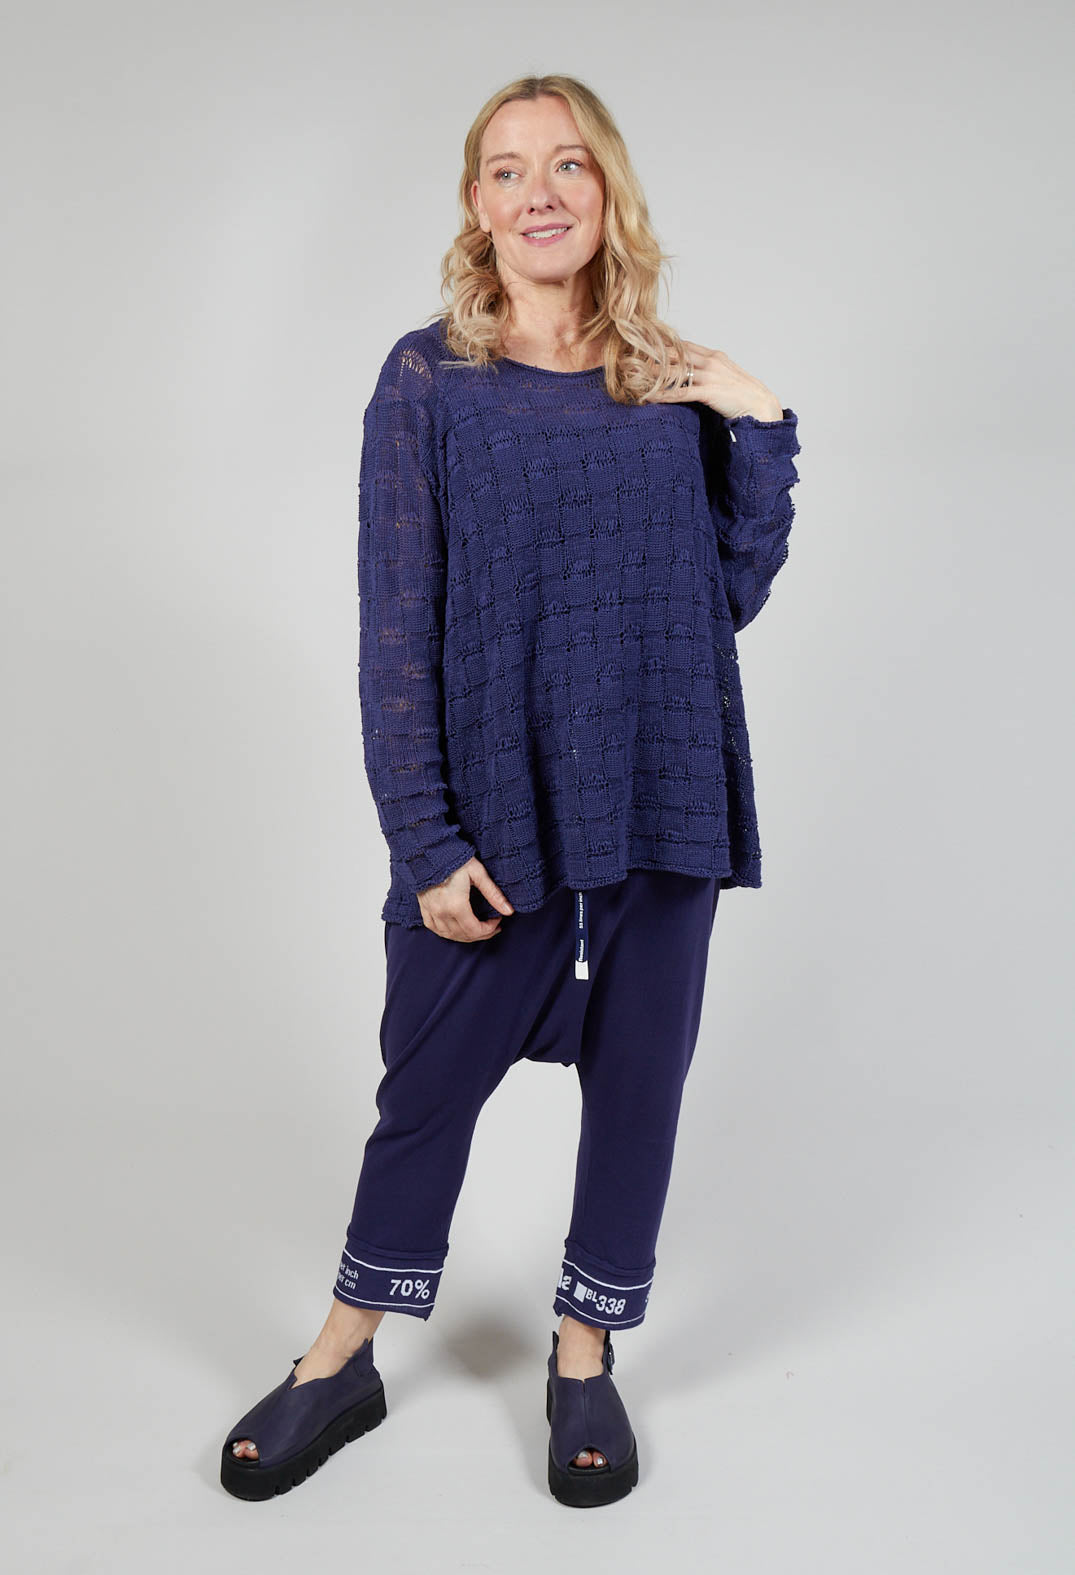 Jumper with Square Detail Knit in Azur